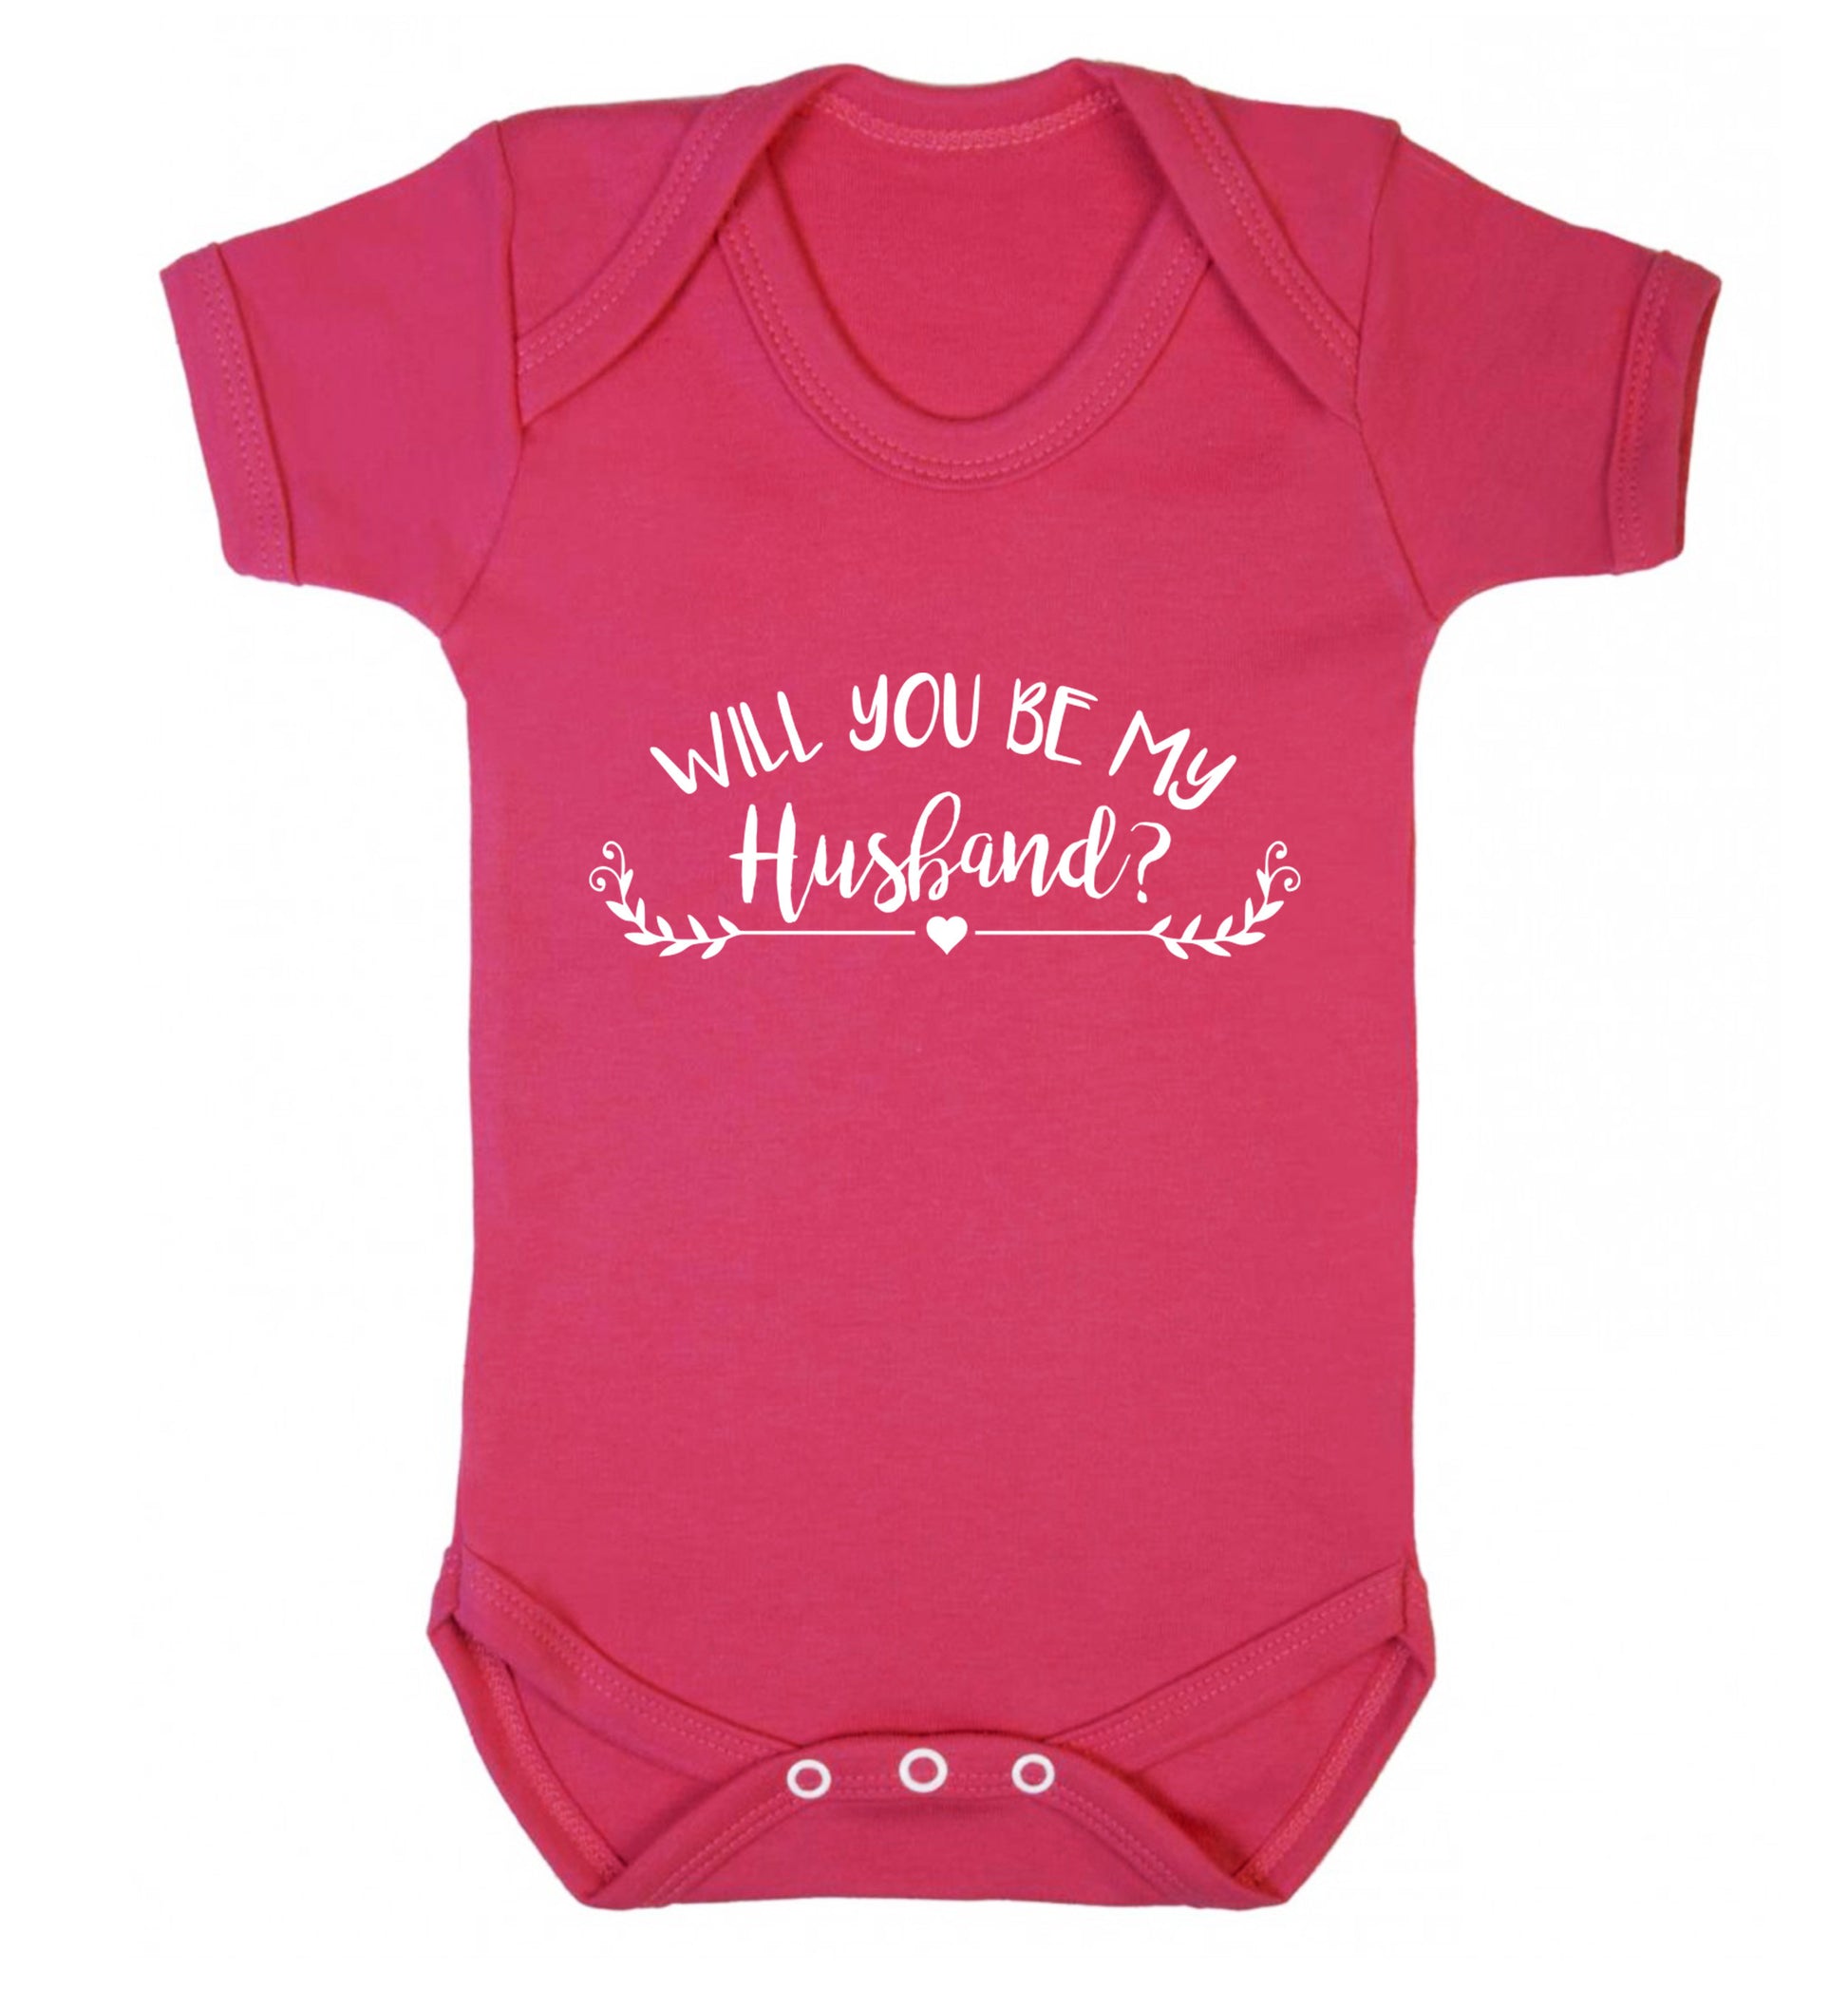 Will you be my husband? Baby Vest dark pink 18-24 months